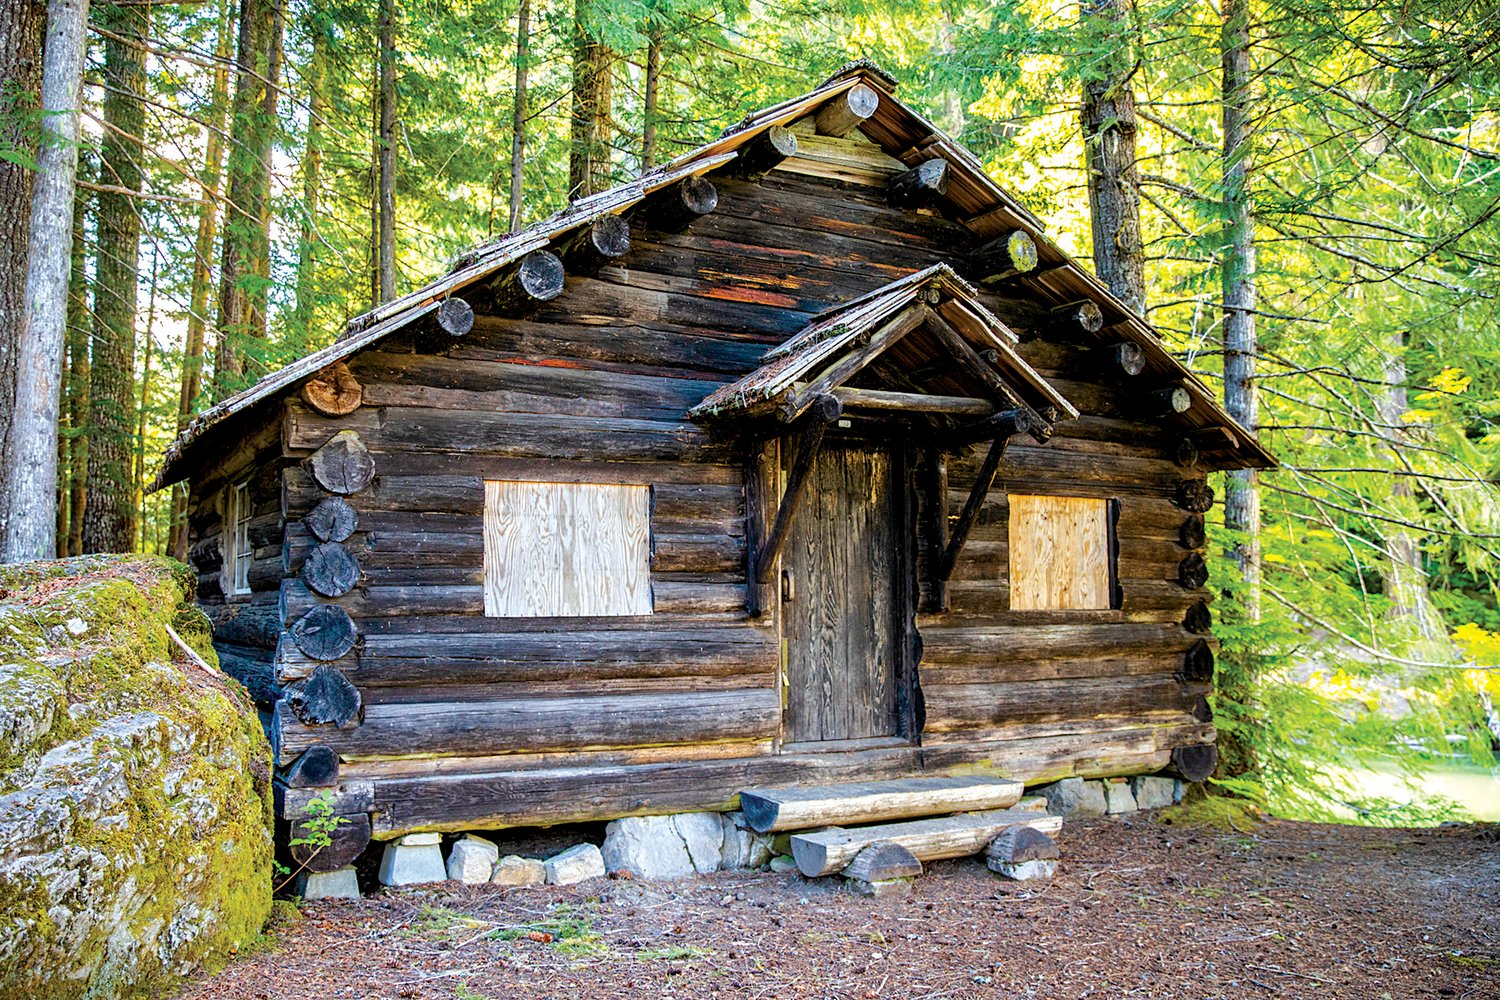 A log cabin stands along the Packwood Lake trail Wednesday in the Gifford Pinchot National Forest.